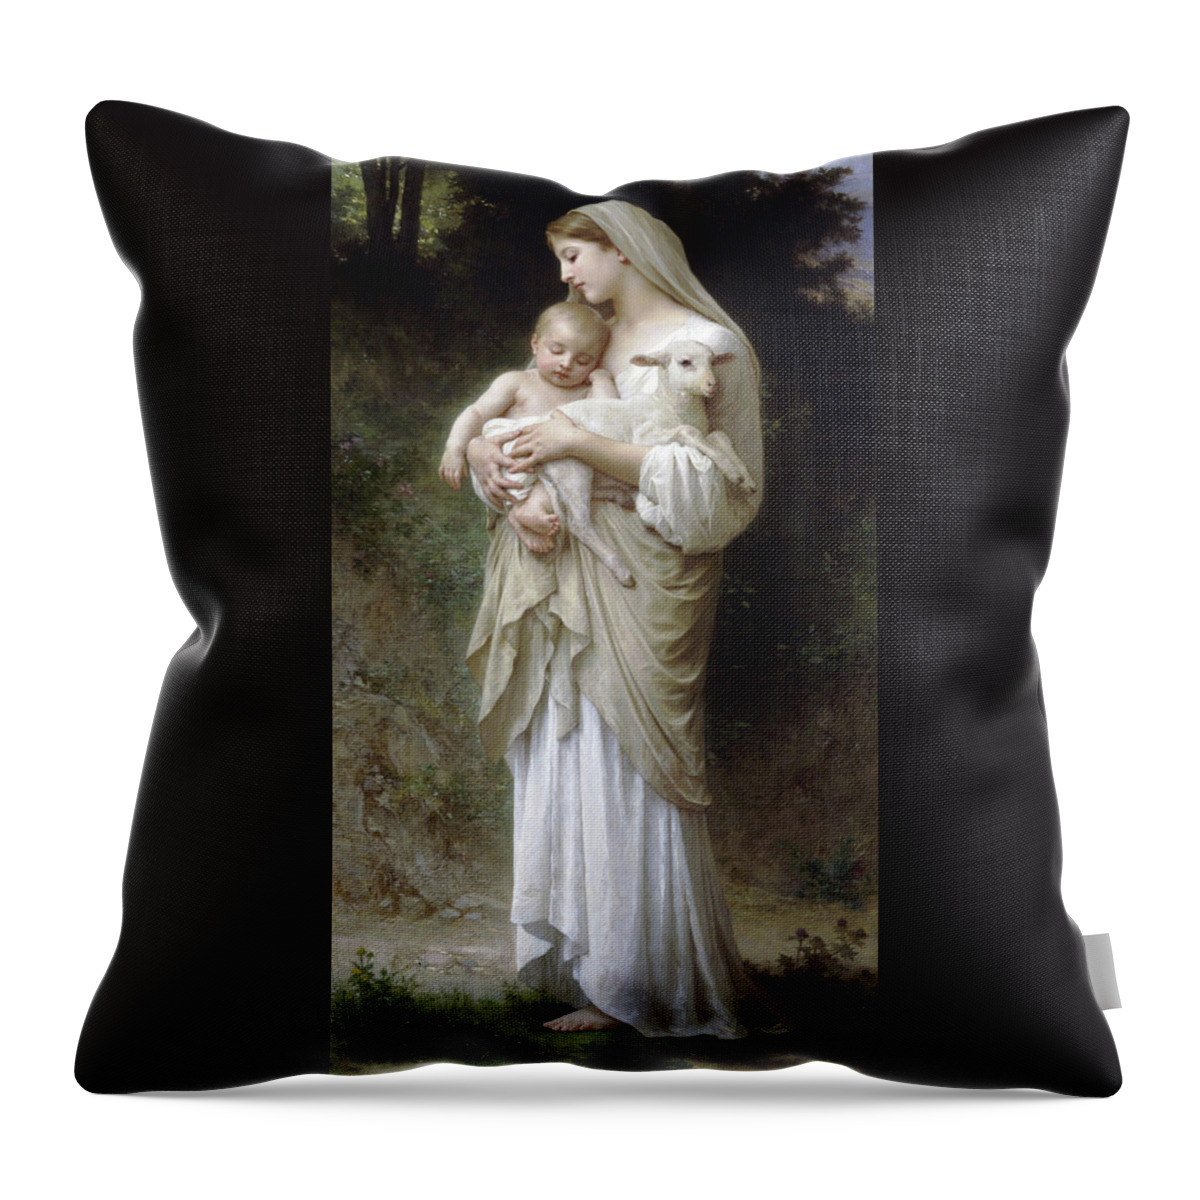 L'innocence Throw Pillow featuring the painting Innocence by William